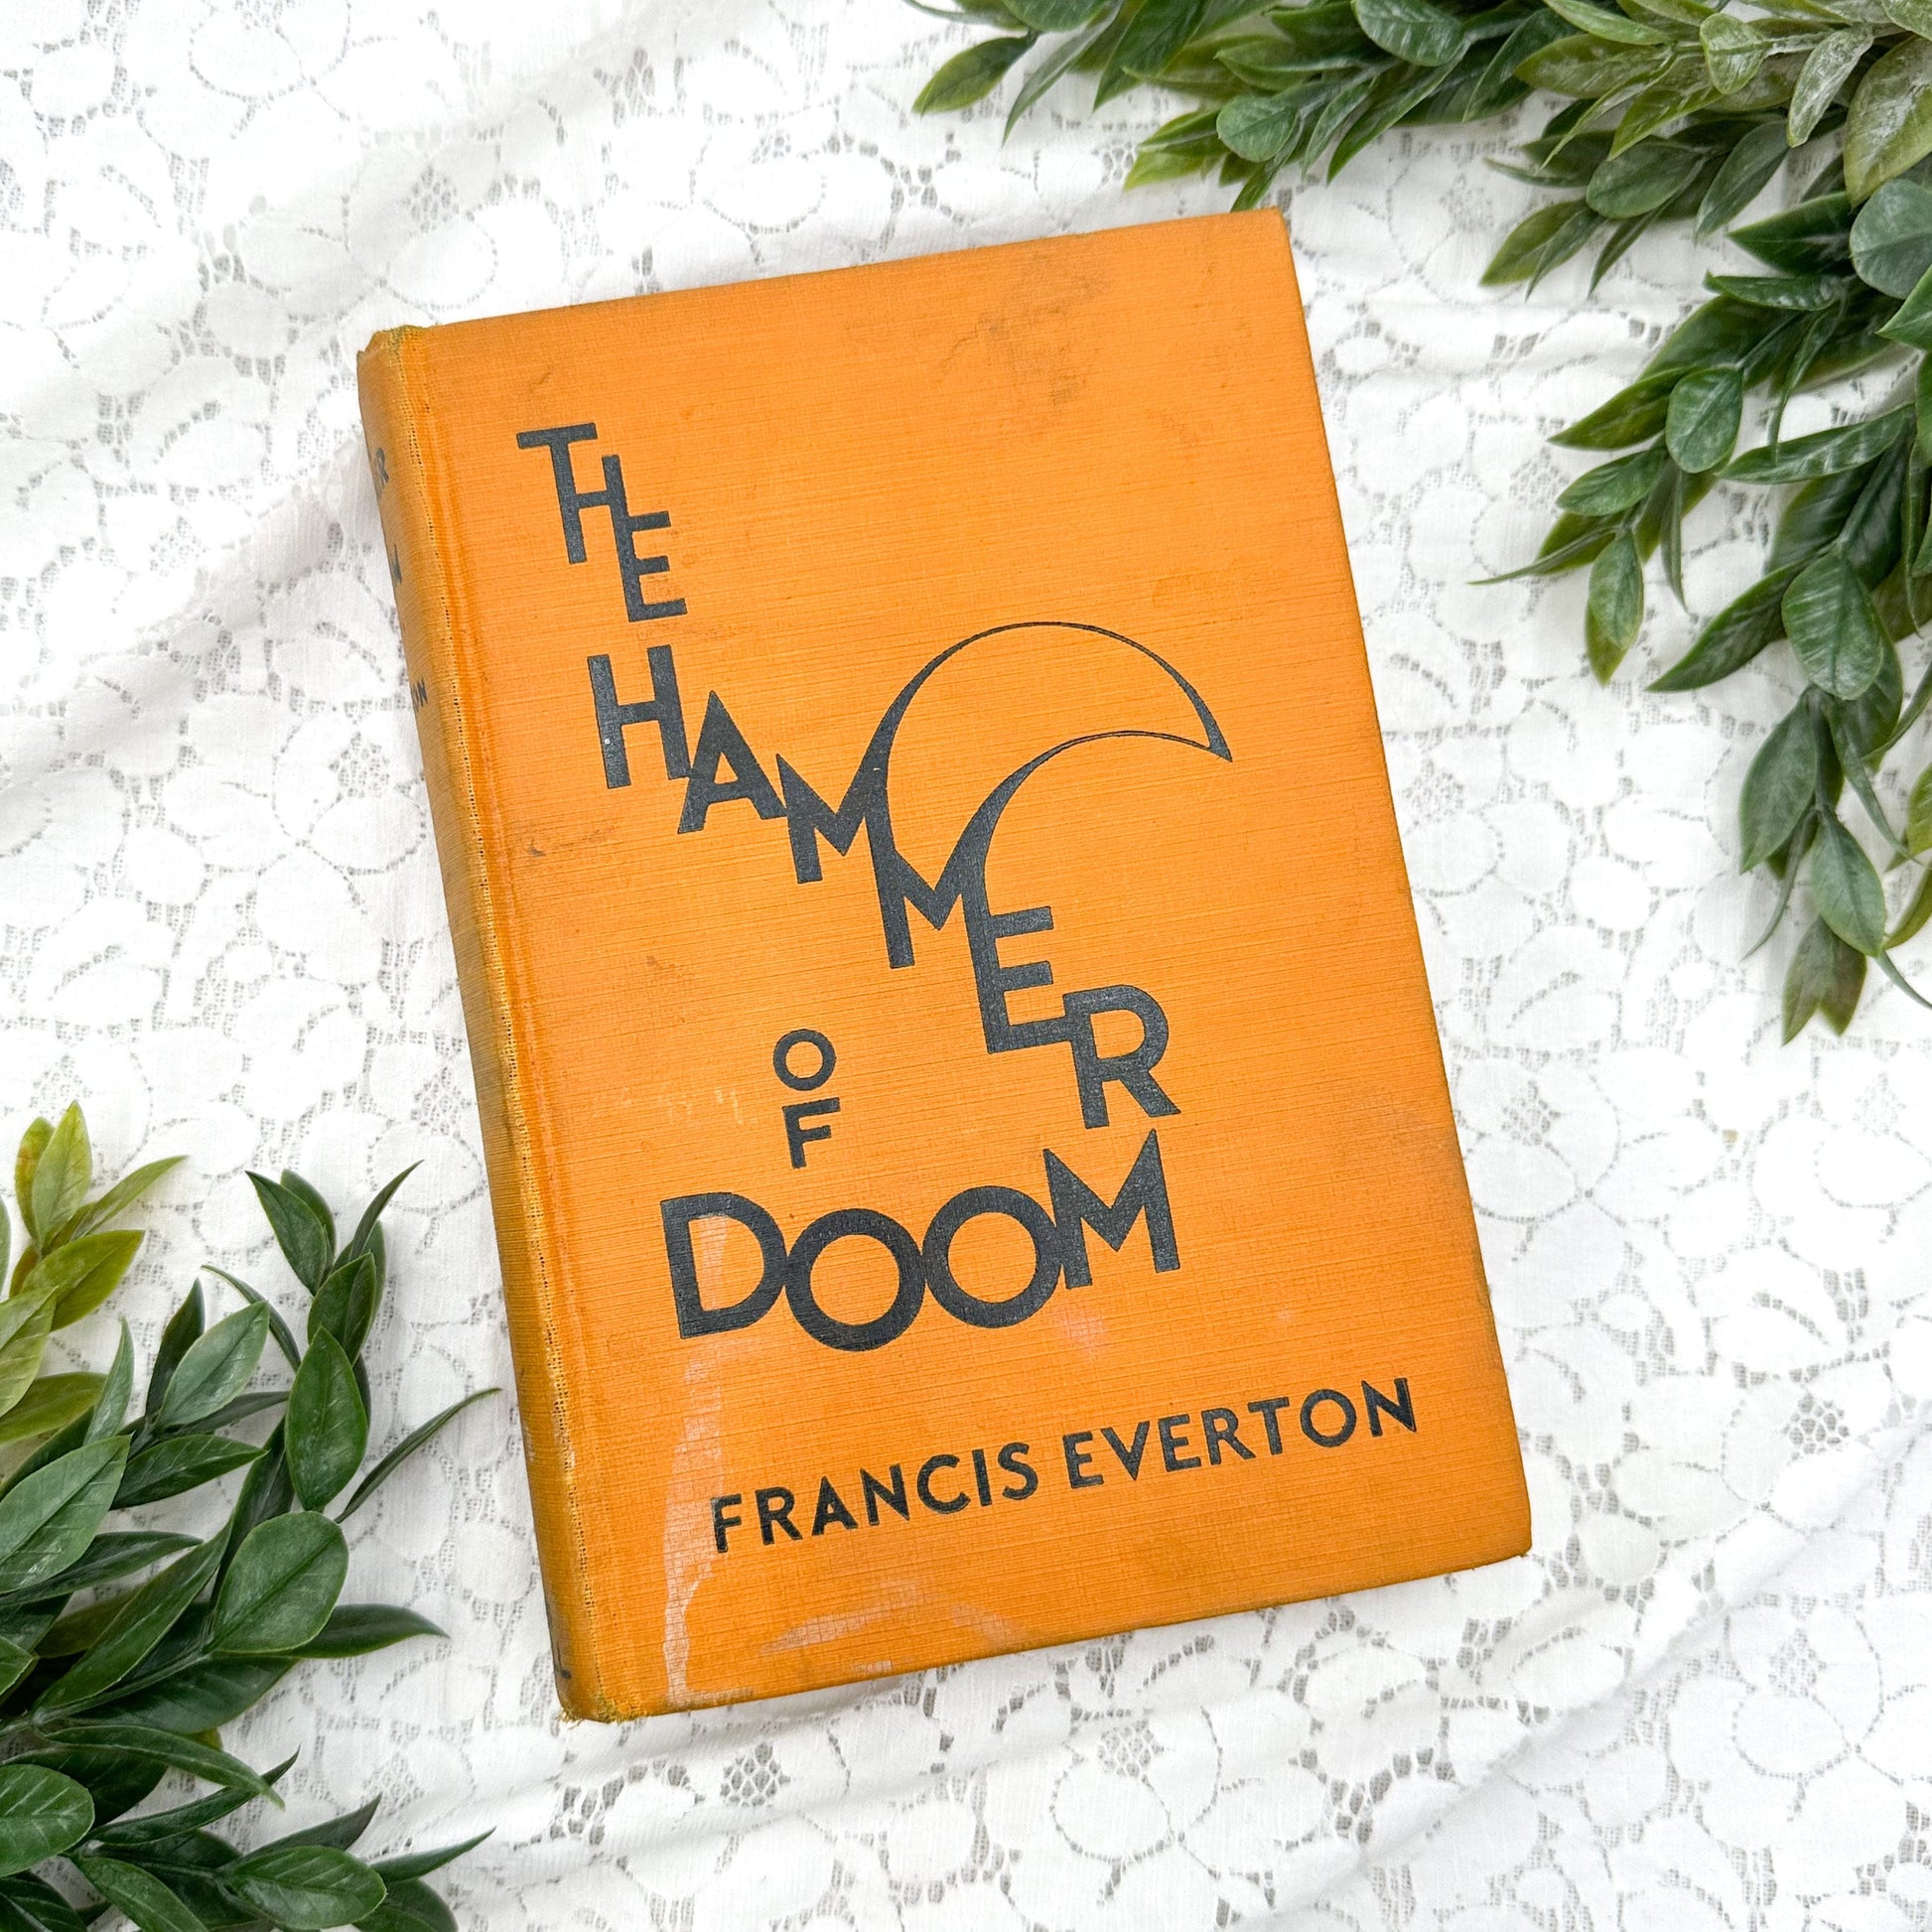 The Hammer of Doom by Francis Everton